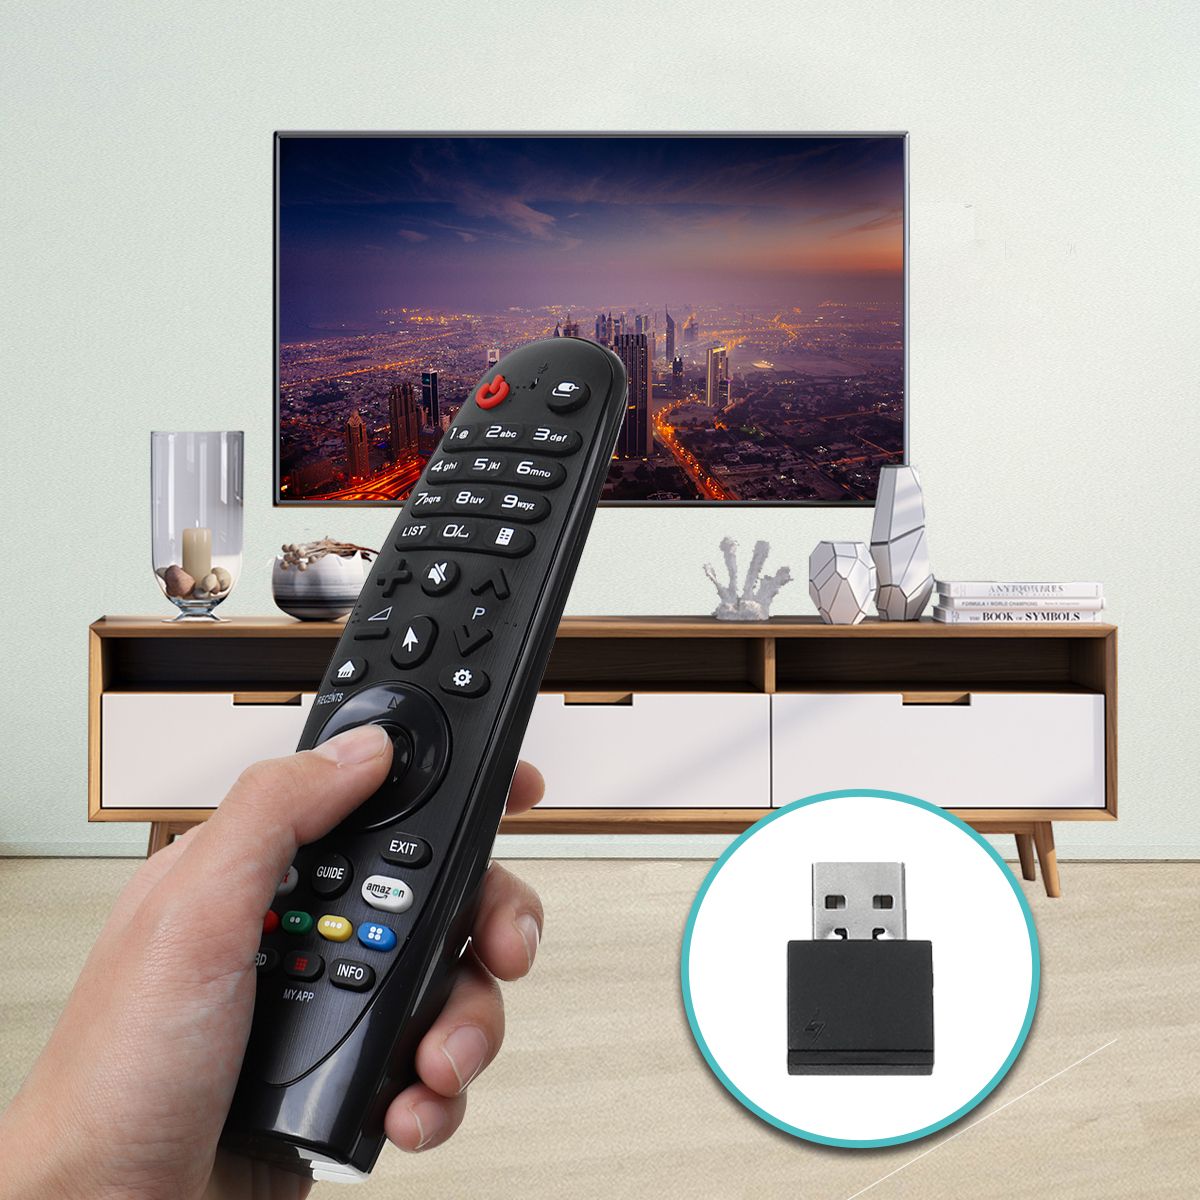 E23815-Wireless-Remote-Control-Replacement-with-USB-Receiver-for-LG-AN-MR650A-Smart-TV-1650001